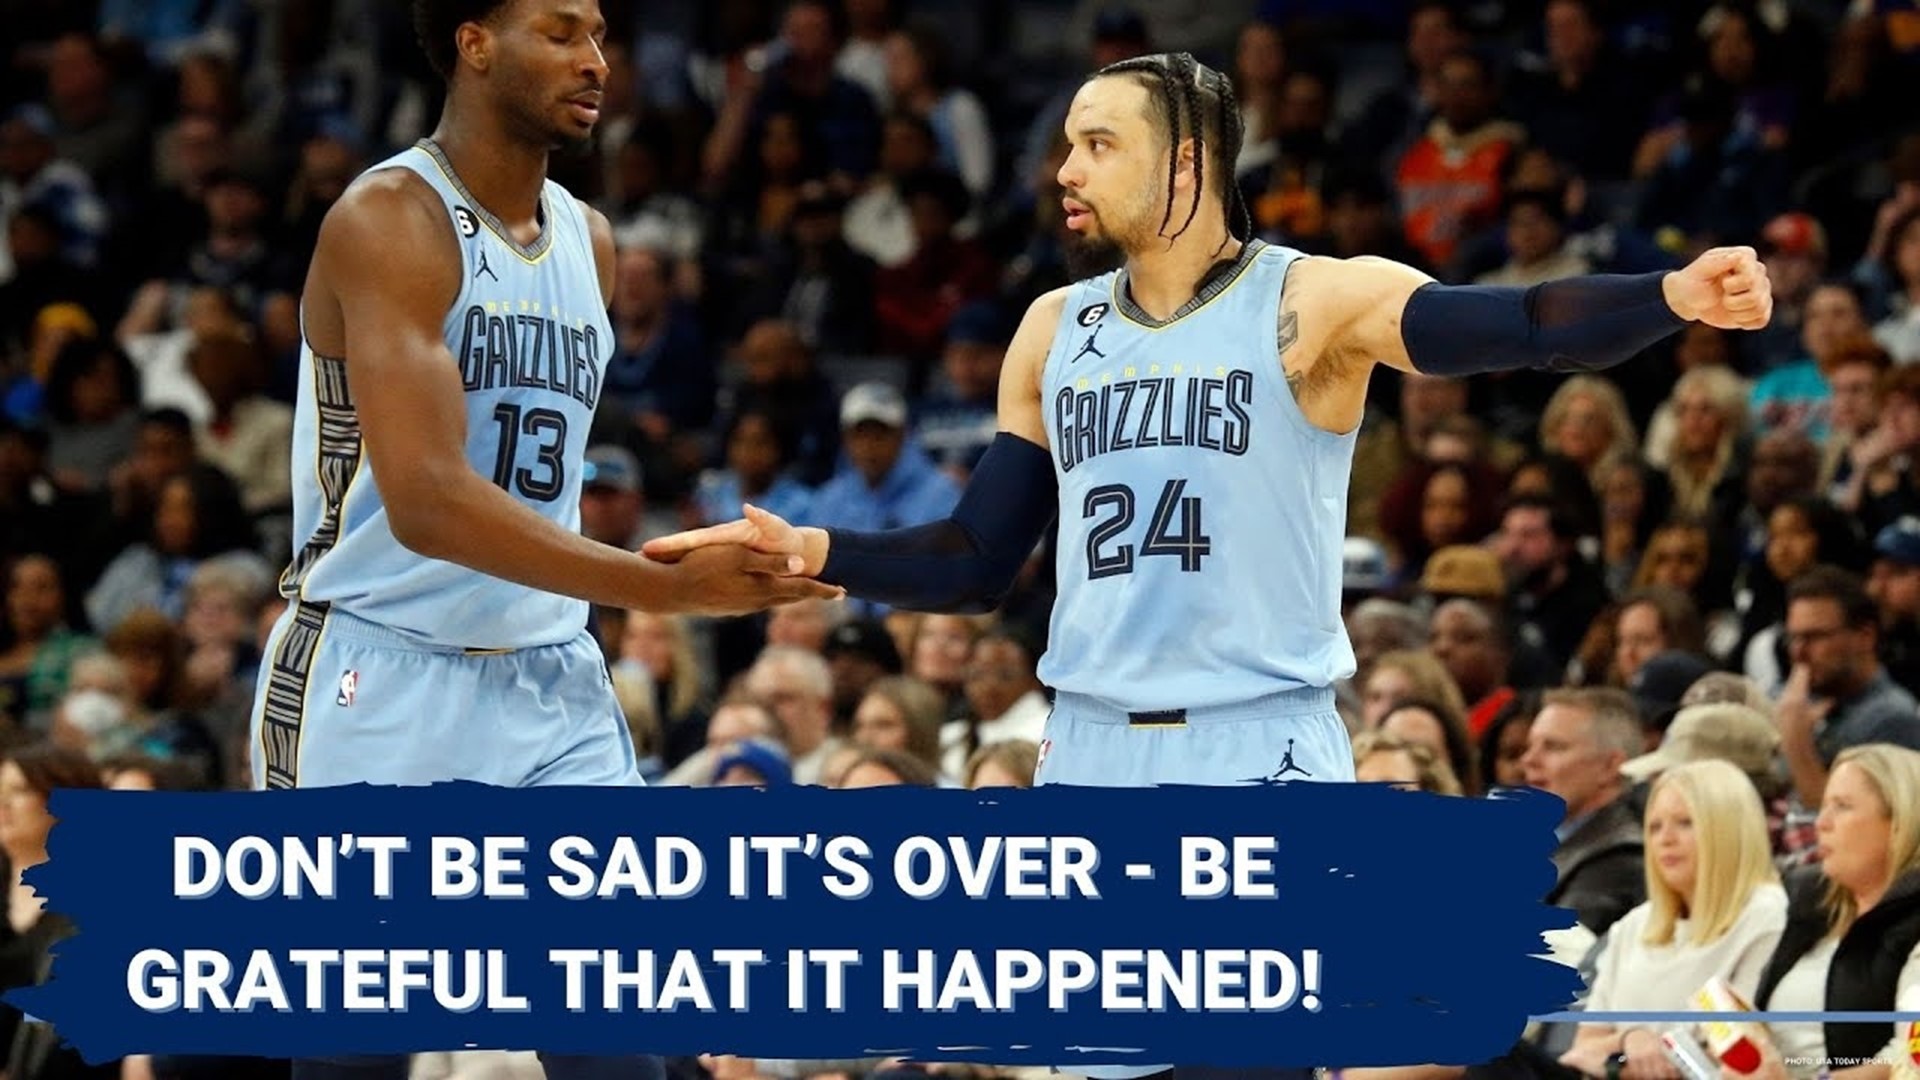 Why you should be thankful for the Memphis Grizzlies - and Dillon Brooks and Steve Kerr